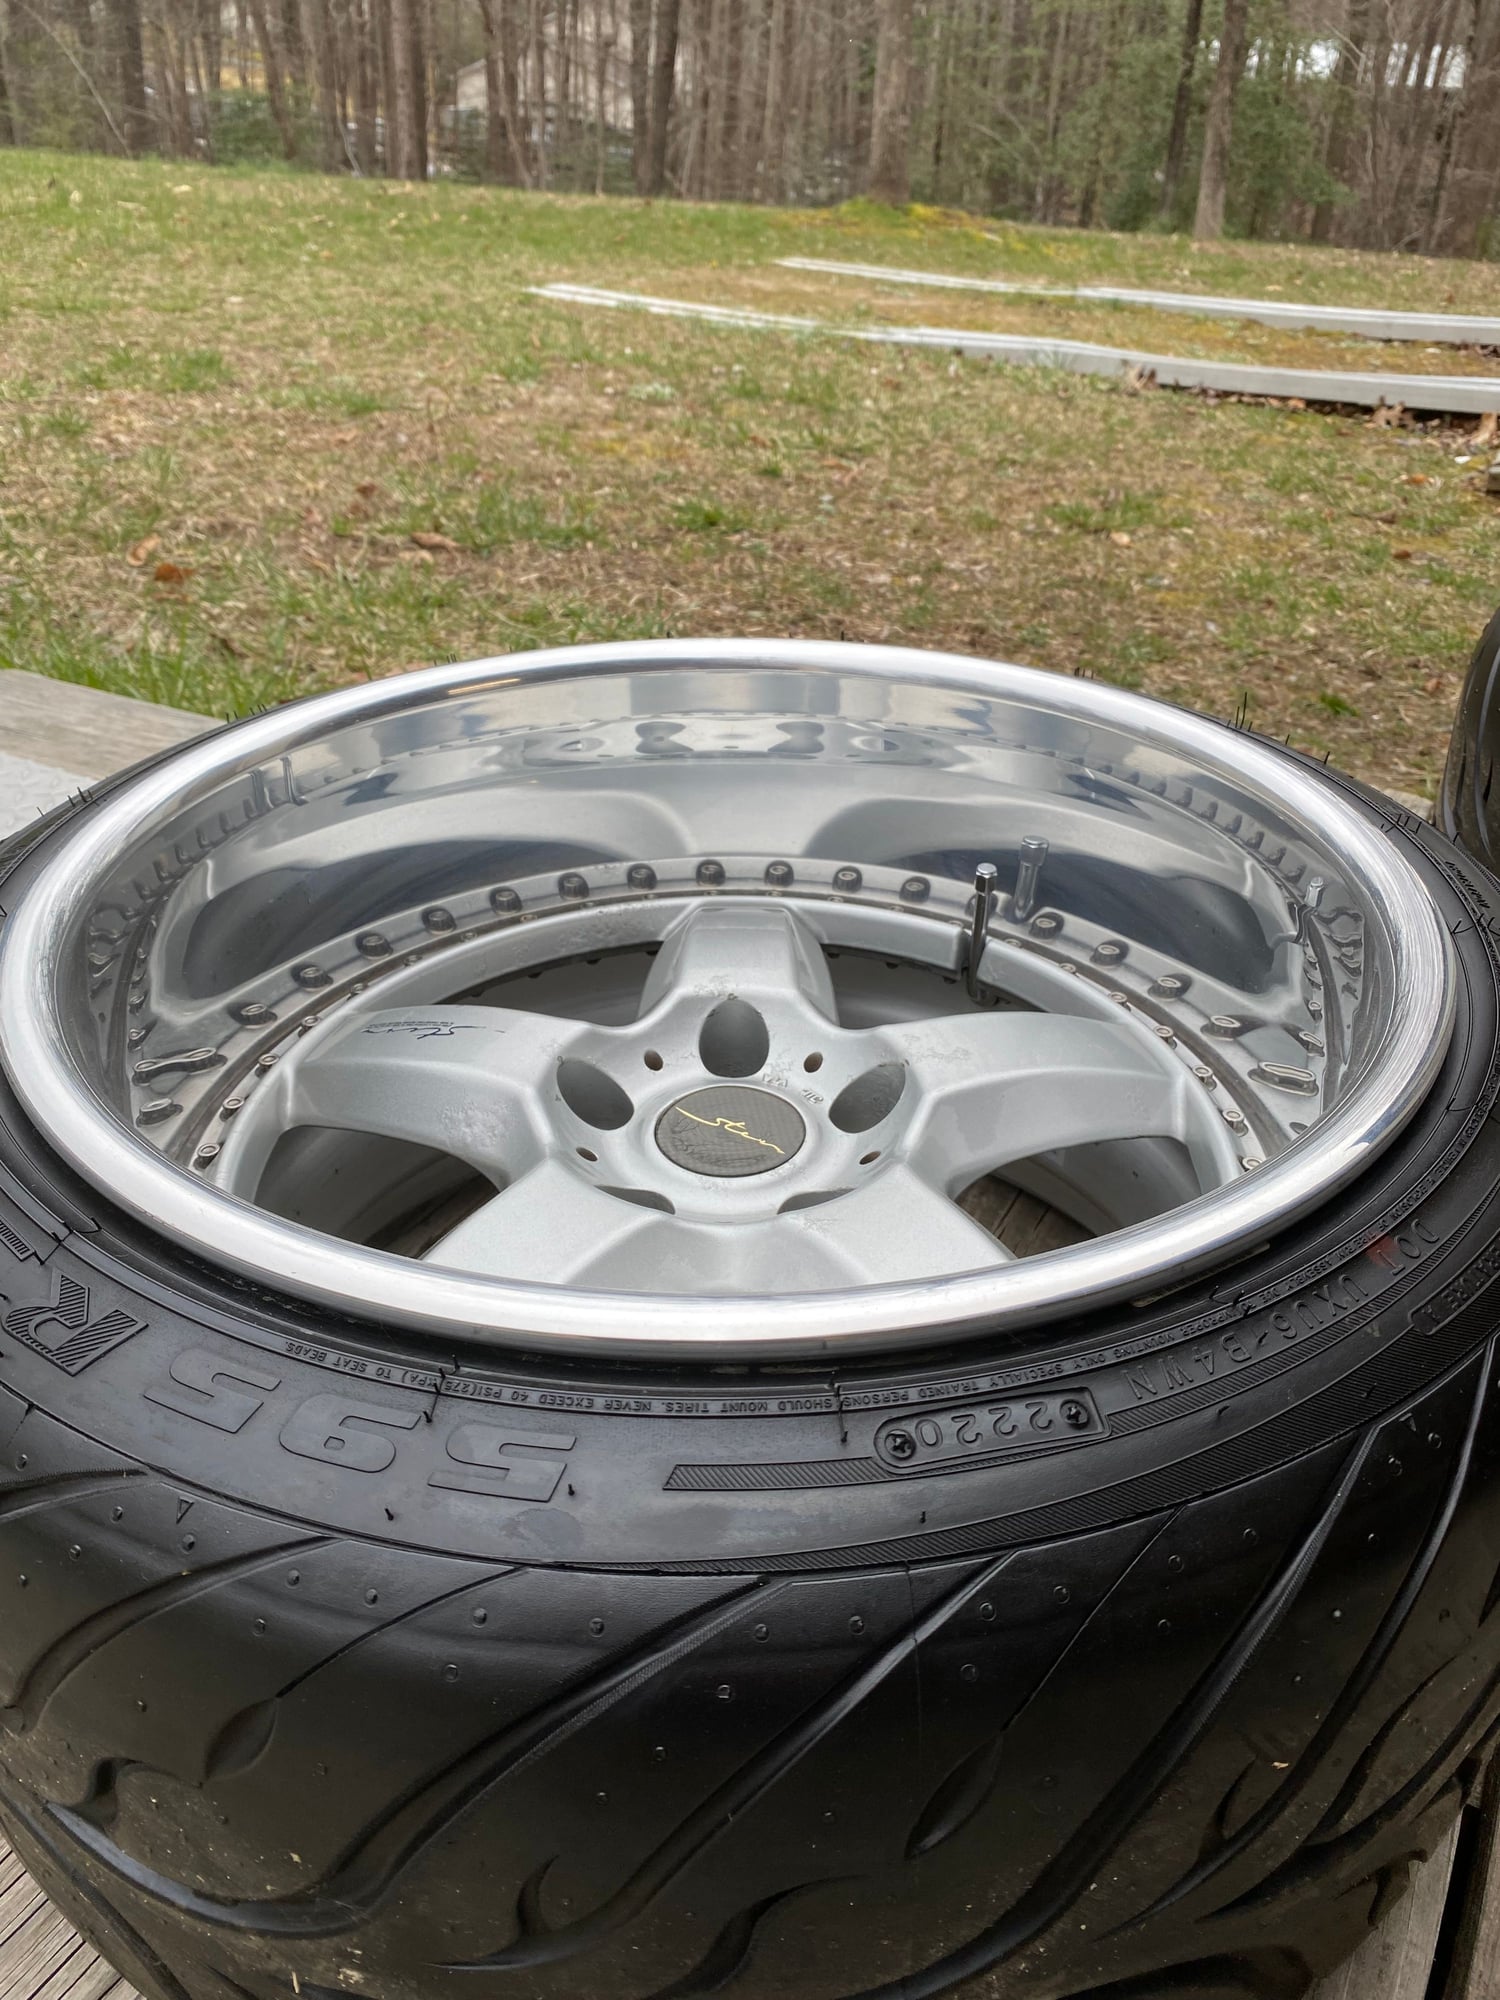 Wheels and Tires/Axles - JDM Stern Beast 17x9.75 -22 17x10.25-23 New Barrels New Tires wide body RX-7 FC FD - Used - Prince Frederick, MD 20678, United States